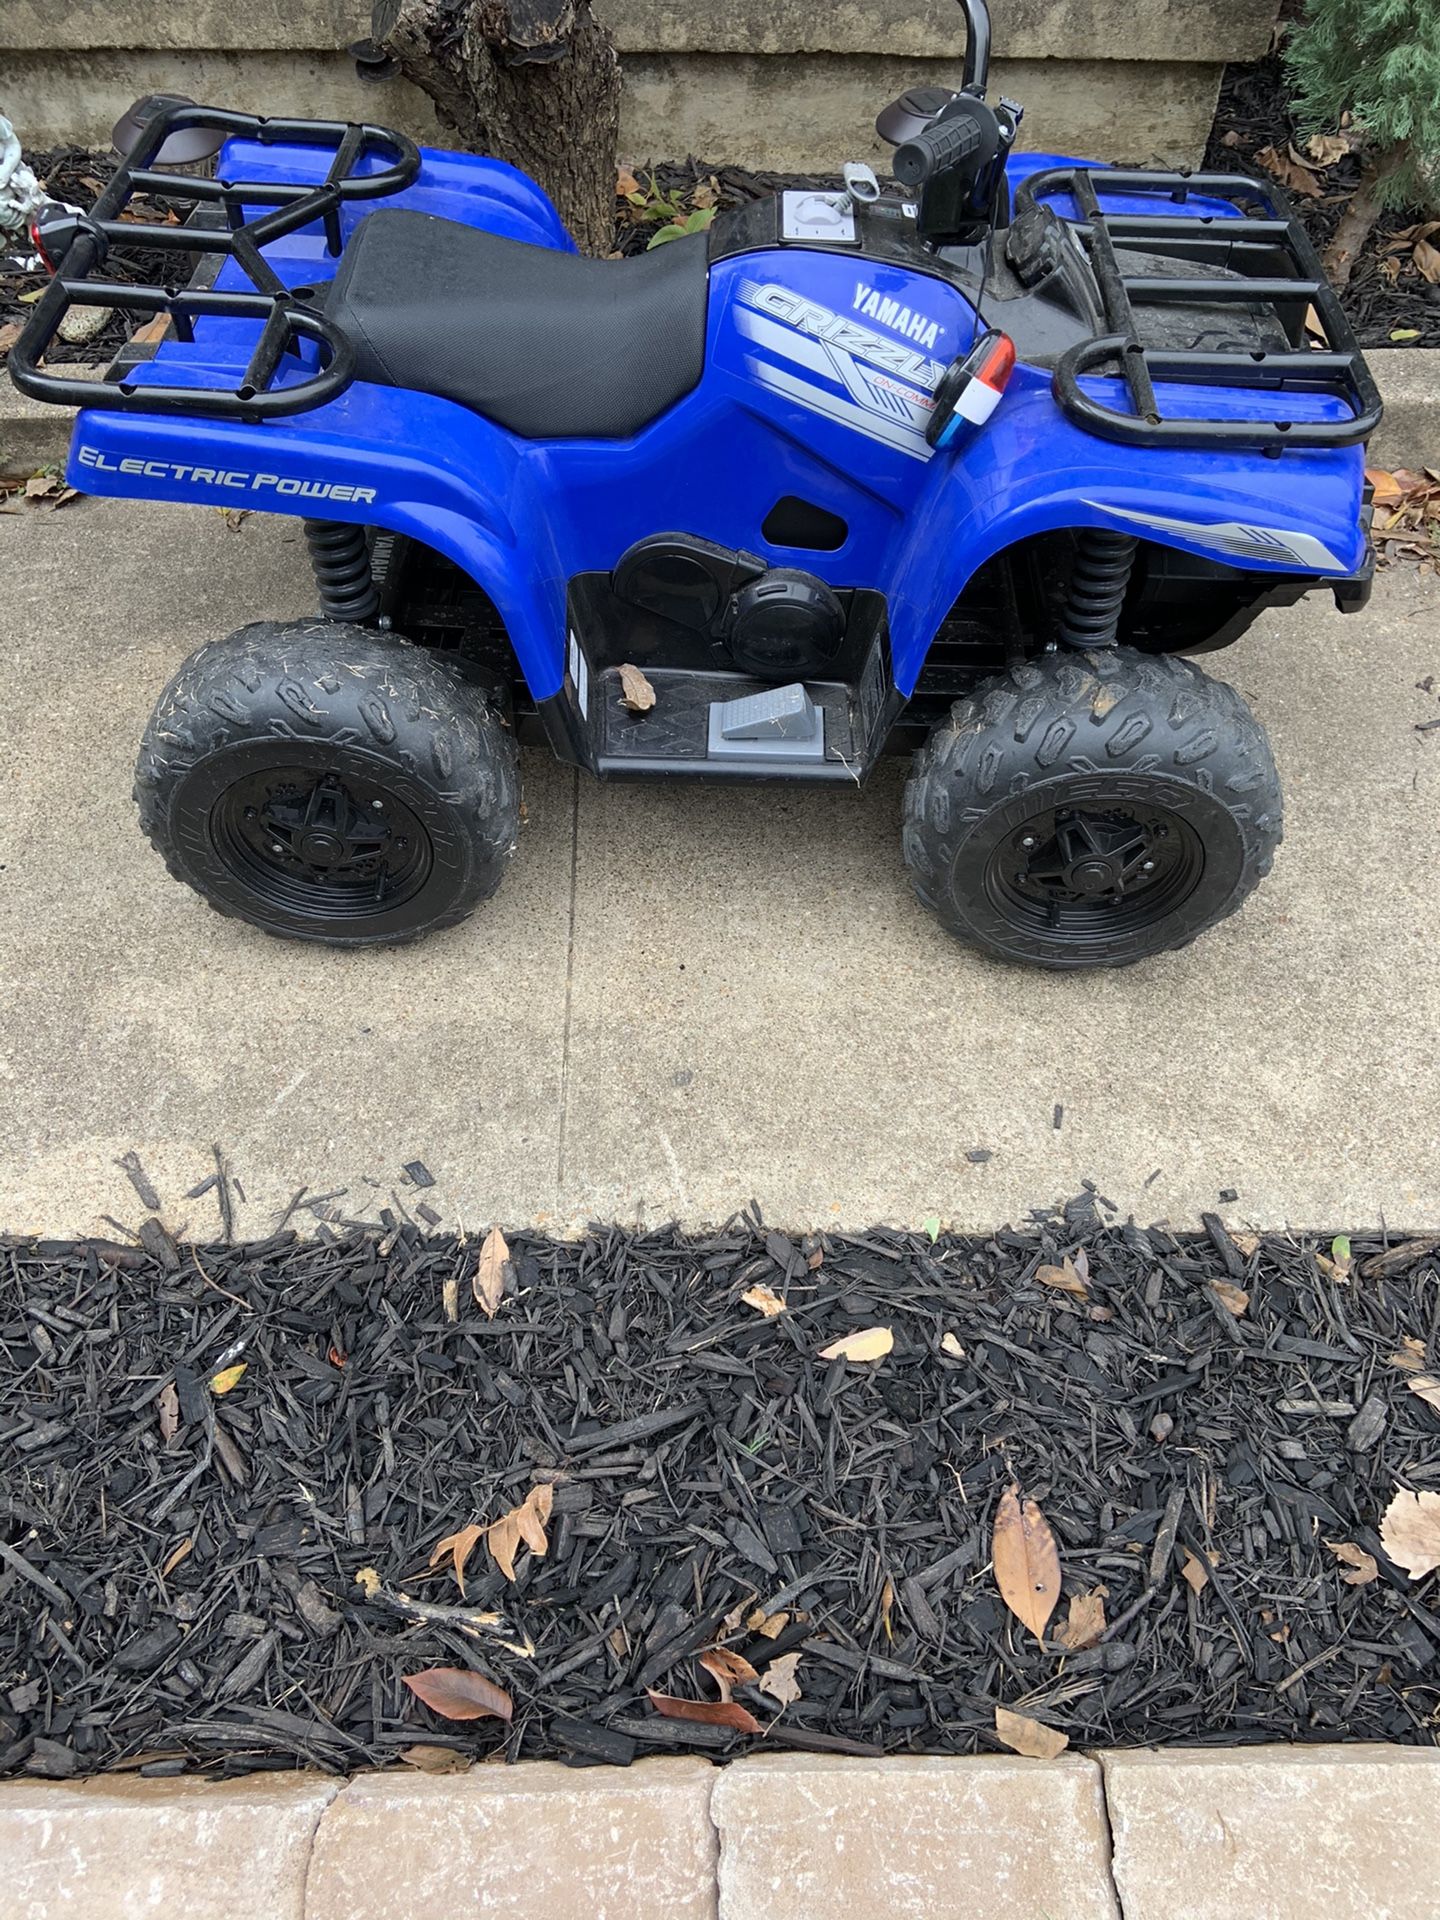 Yamaha Grizzly power 4 wheeler // battery operated